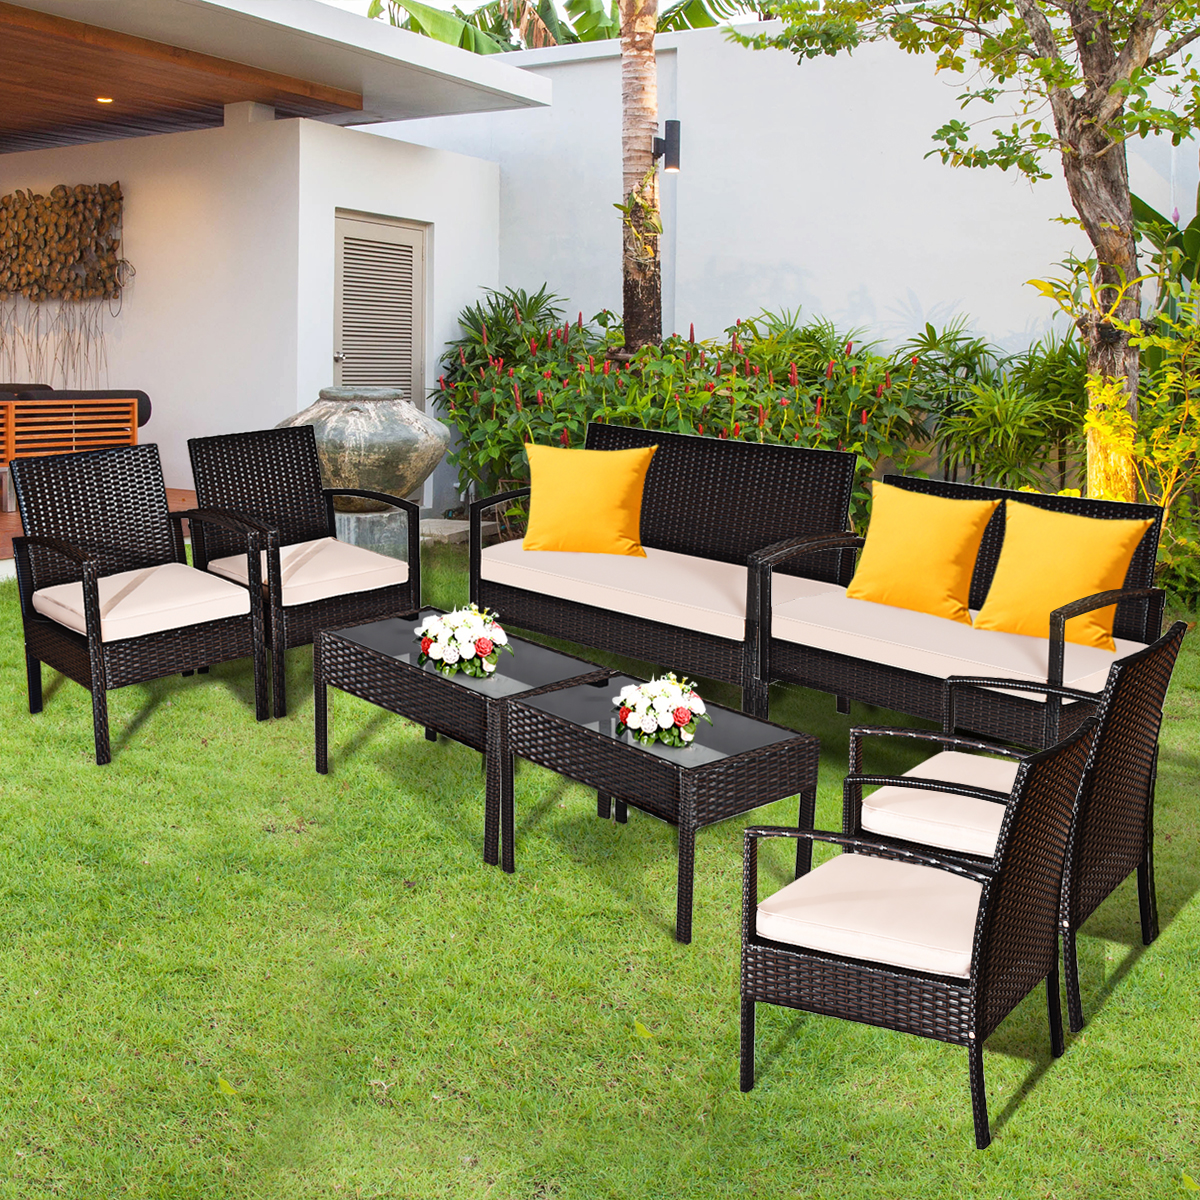 Patiojoy 4PCS Conversation Wicker Set Patio Rattan Table&Cushioned Chair - image 3 of 5